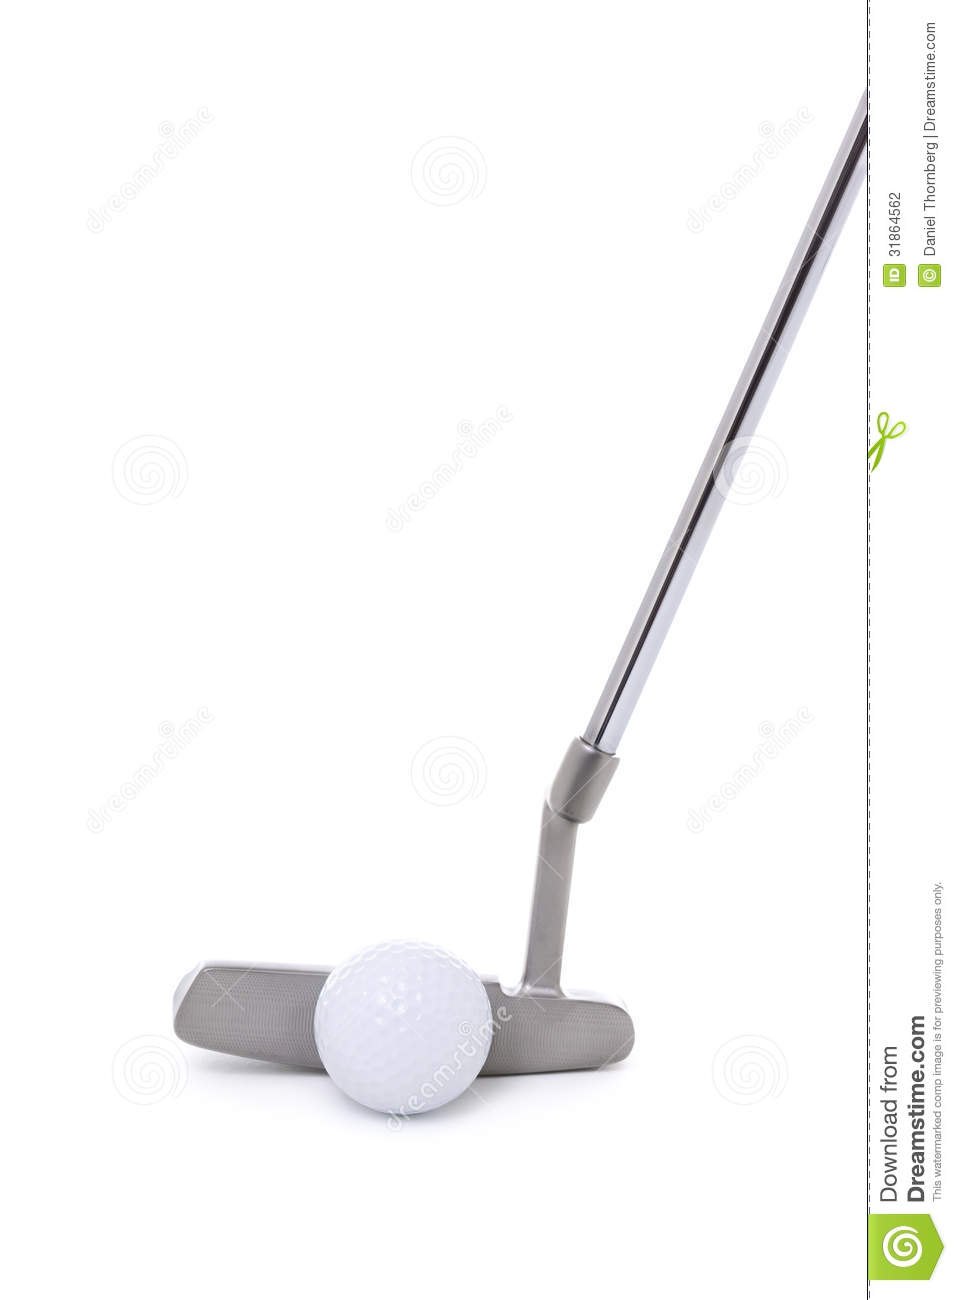 Modern Golf Putter And Ball On A White Background